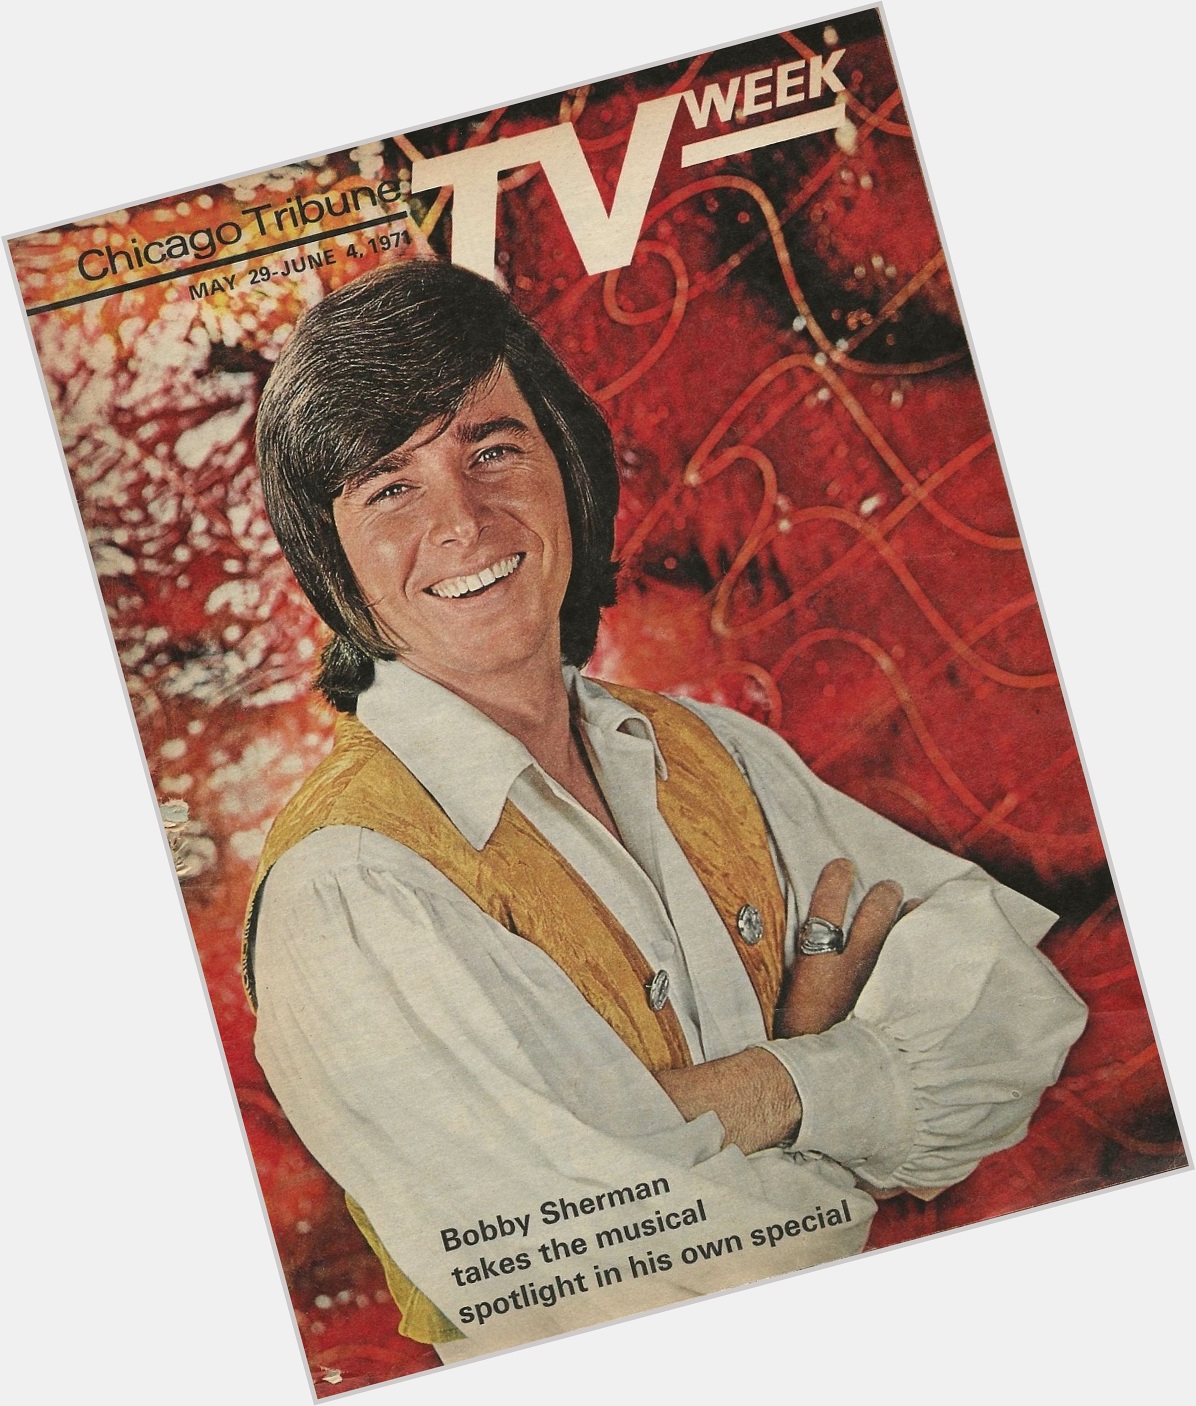 Happy Birthday to Bobby Sherman, born on this day in 1943
Chicago Tribune TV Week.  May 29 - June 4, 1971 